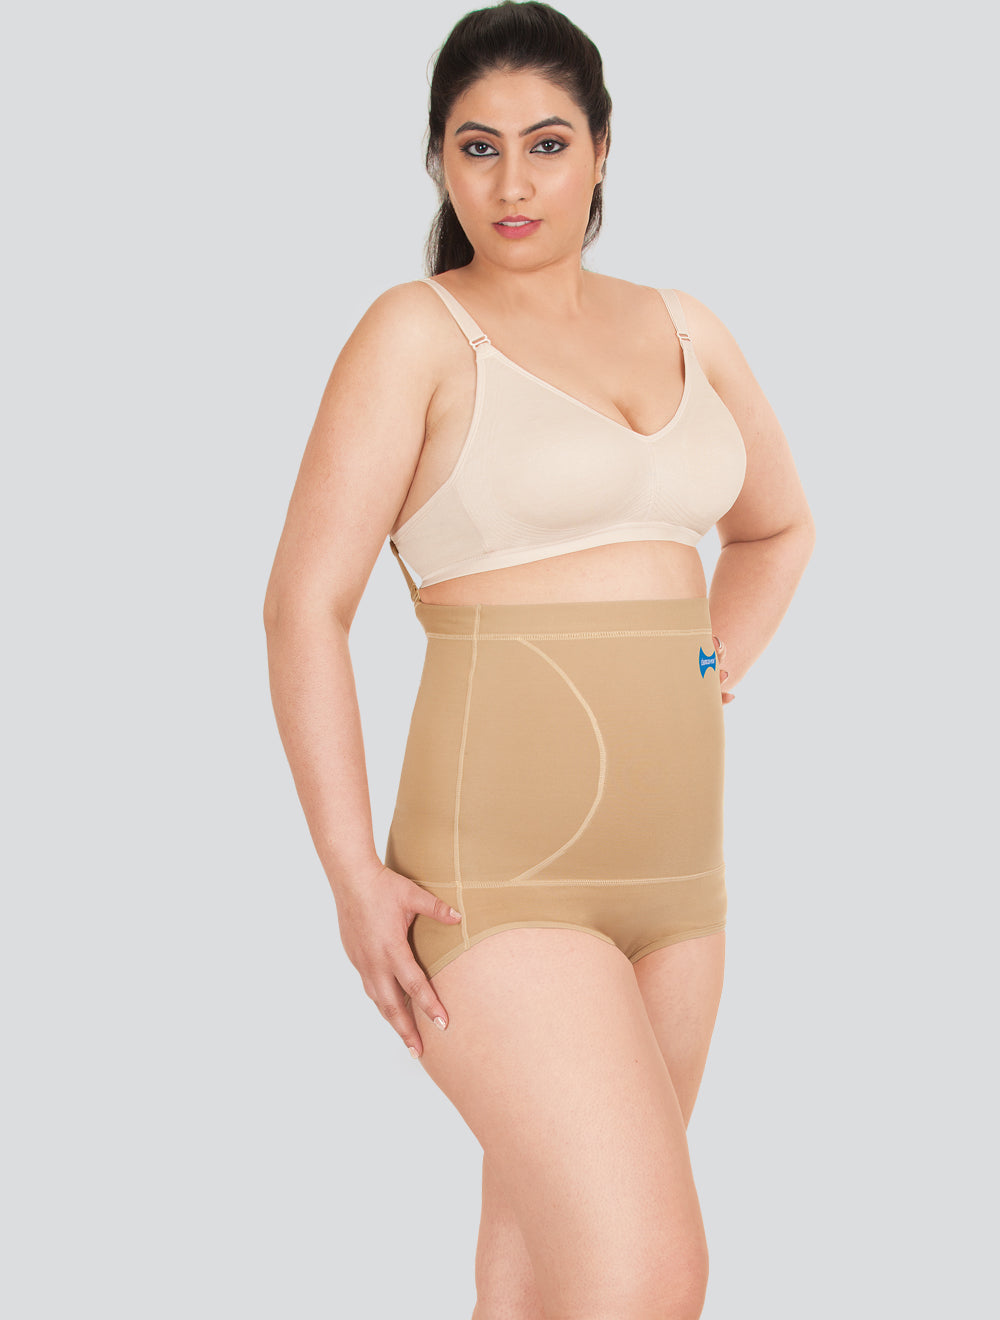 Dermawear Hip Corset A-404 at Rs 1350, Women Corset in Ahmedabad